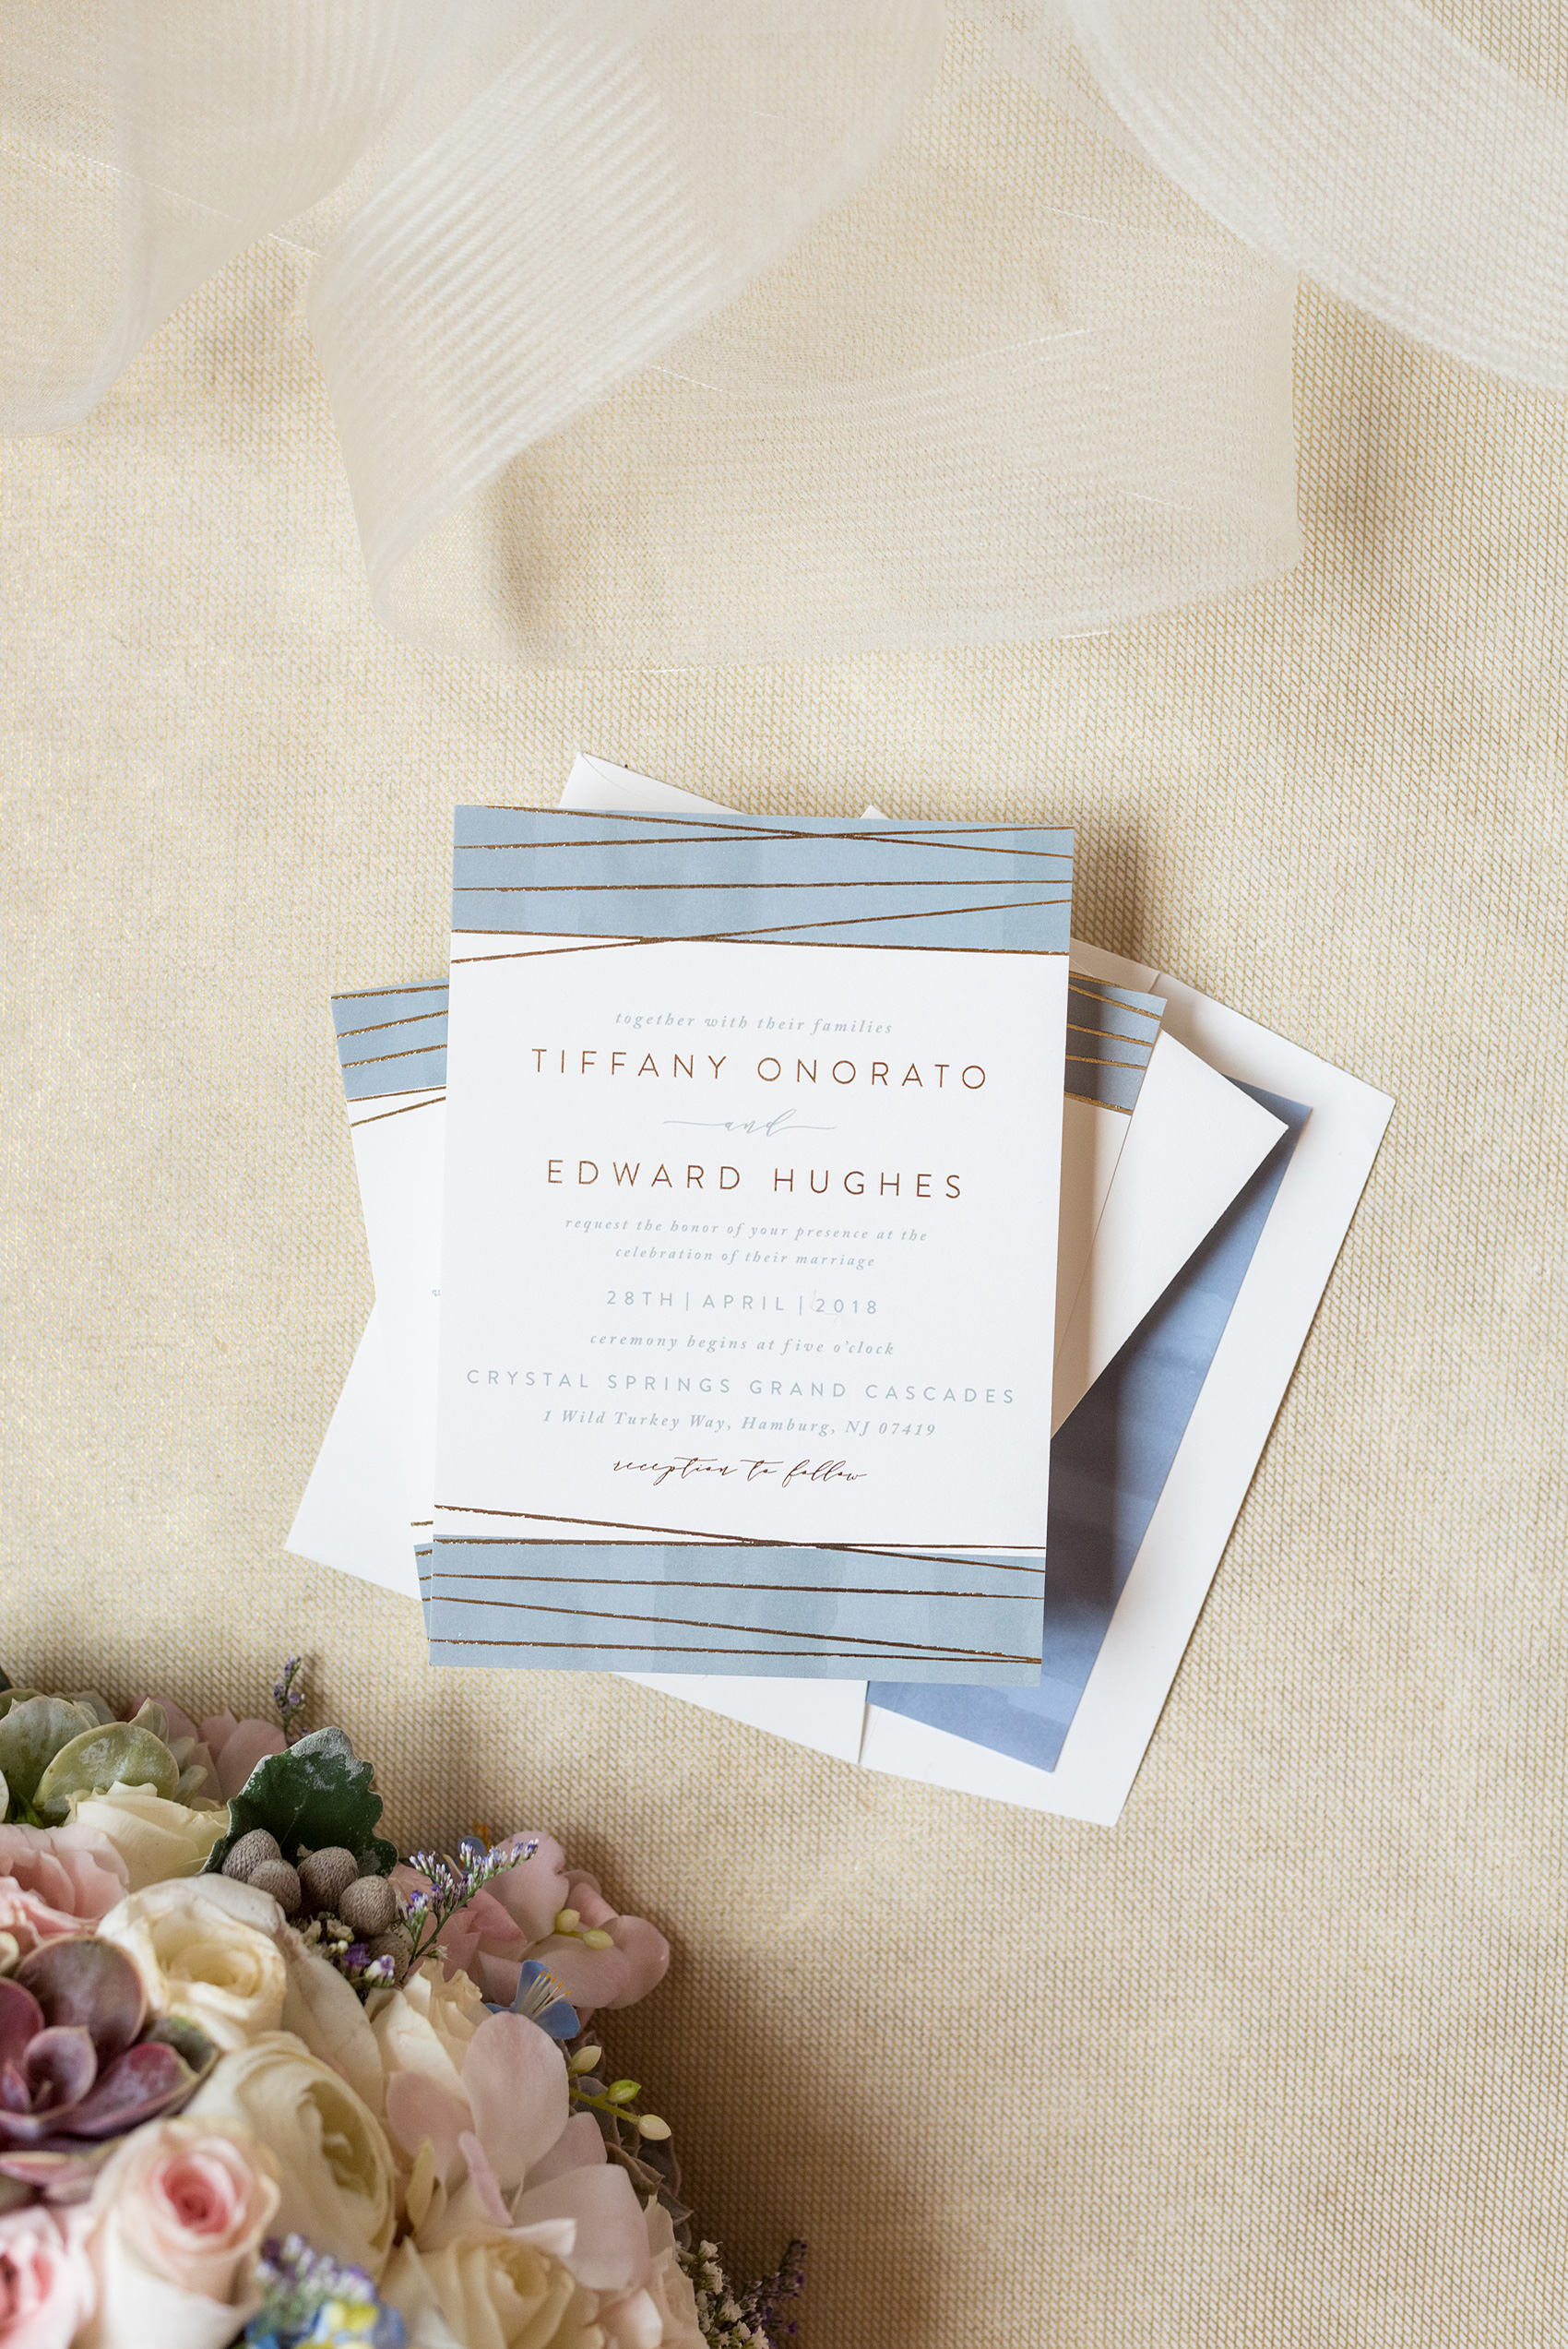 Crystal Springs Resort wedding photos in New Jersey, with photographer Mikkel Paige Photography. The couple’s spring wedding had an outdoor ceremony with photos at this rustic, woodsy venue showing their blue and pink palette decor from getting ready to their reception. This detail picture shows the couple's gold and blue wedding invitation. Click through to see their complete wedding recap! #NewJerseywedding #MikkelPaige #NJweddingphotographer #NJphotographer #springwedding #pinkandblue #weddinginvitation